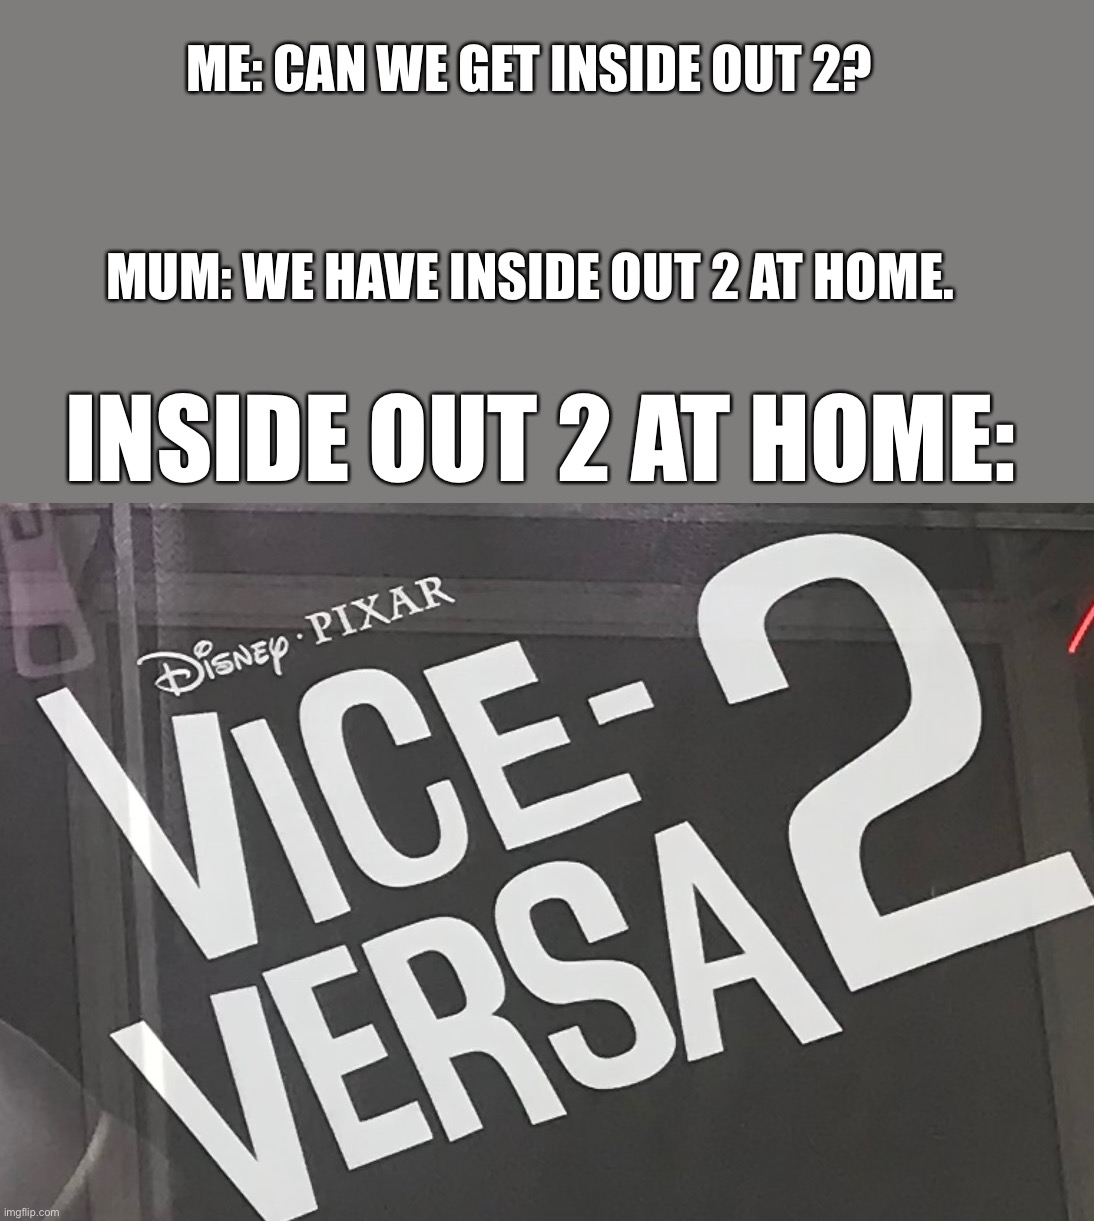 Vice Versa 2 | ME: CAN WE GET INSIDE OUT 2? MUM: WE HAVE INSIDE OUT 2 AT HOME. INSIDE OUT 2 AT HOME: | image tagged in wait what | made w/ Imgflip meme maker